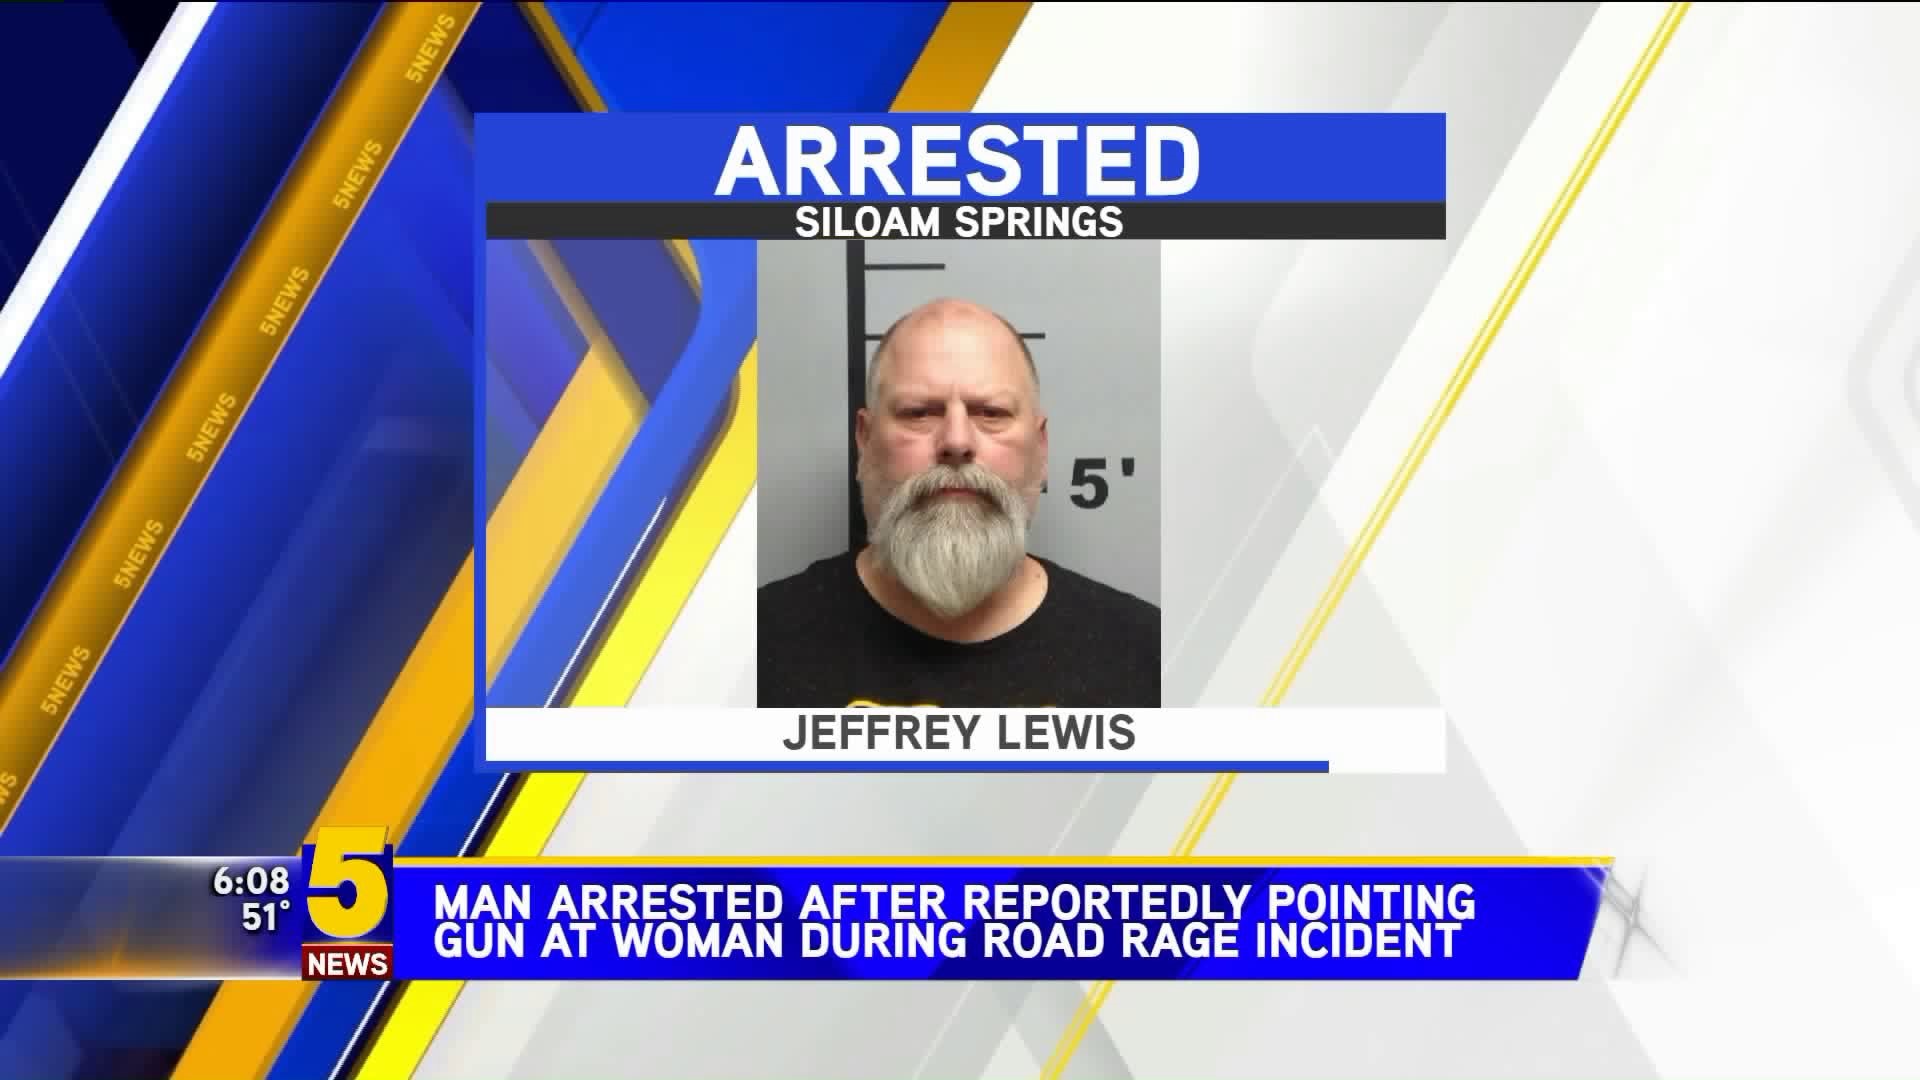 Oklahoma Man Arrested After Allegedly Pointing Gun At Another Driver